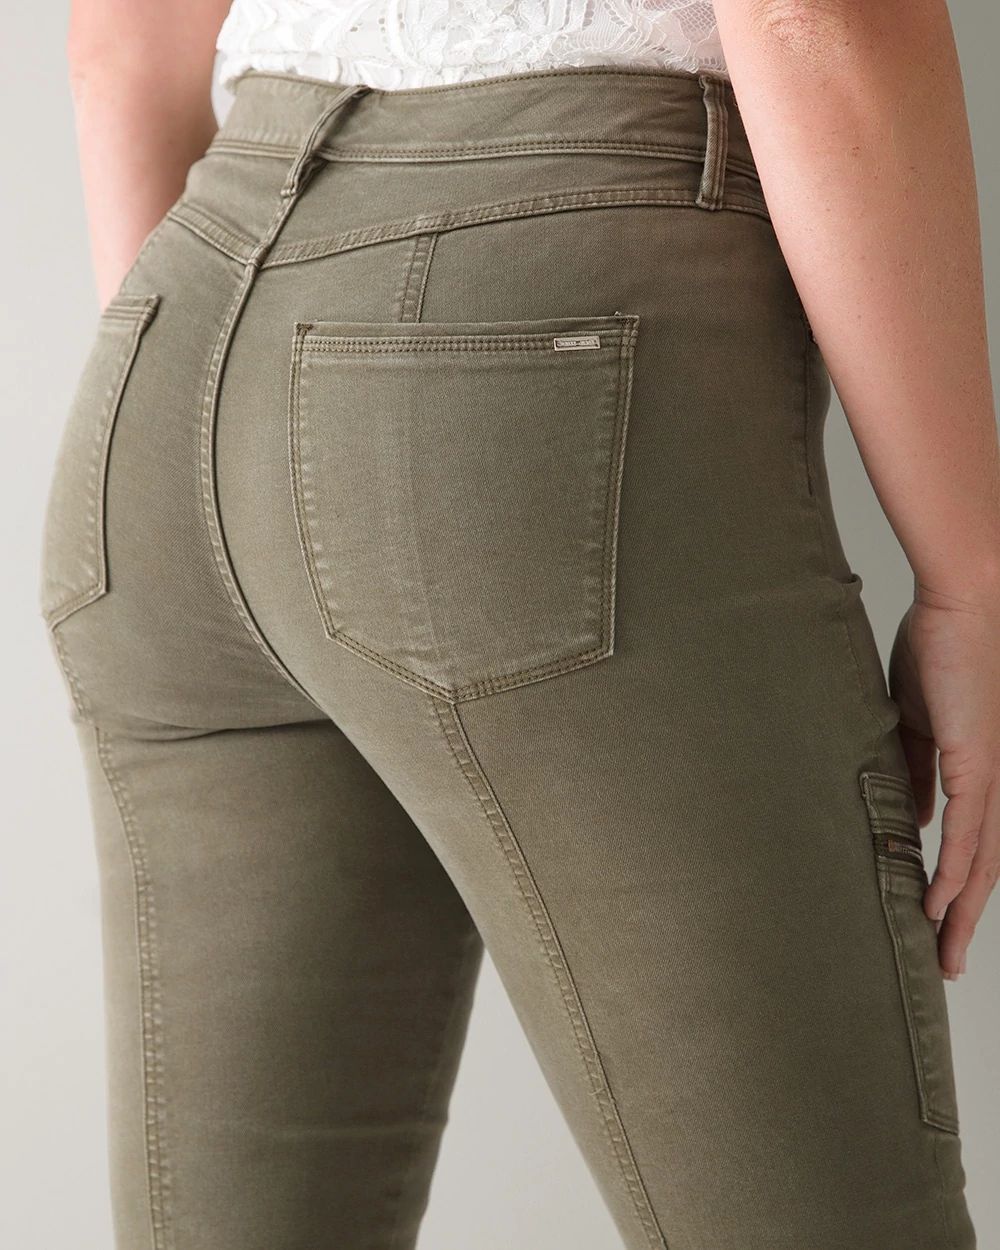 Curvy-Fit Everyday Soft Denim High-Rise Skinny Jeans click to view larger image.